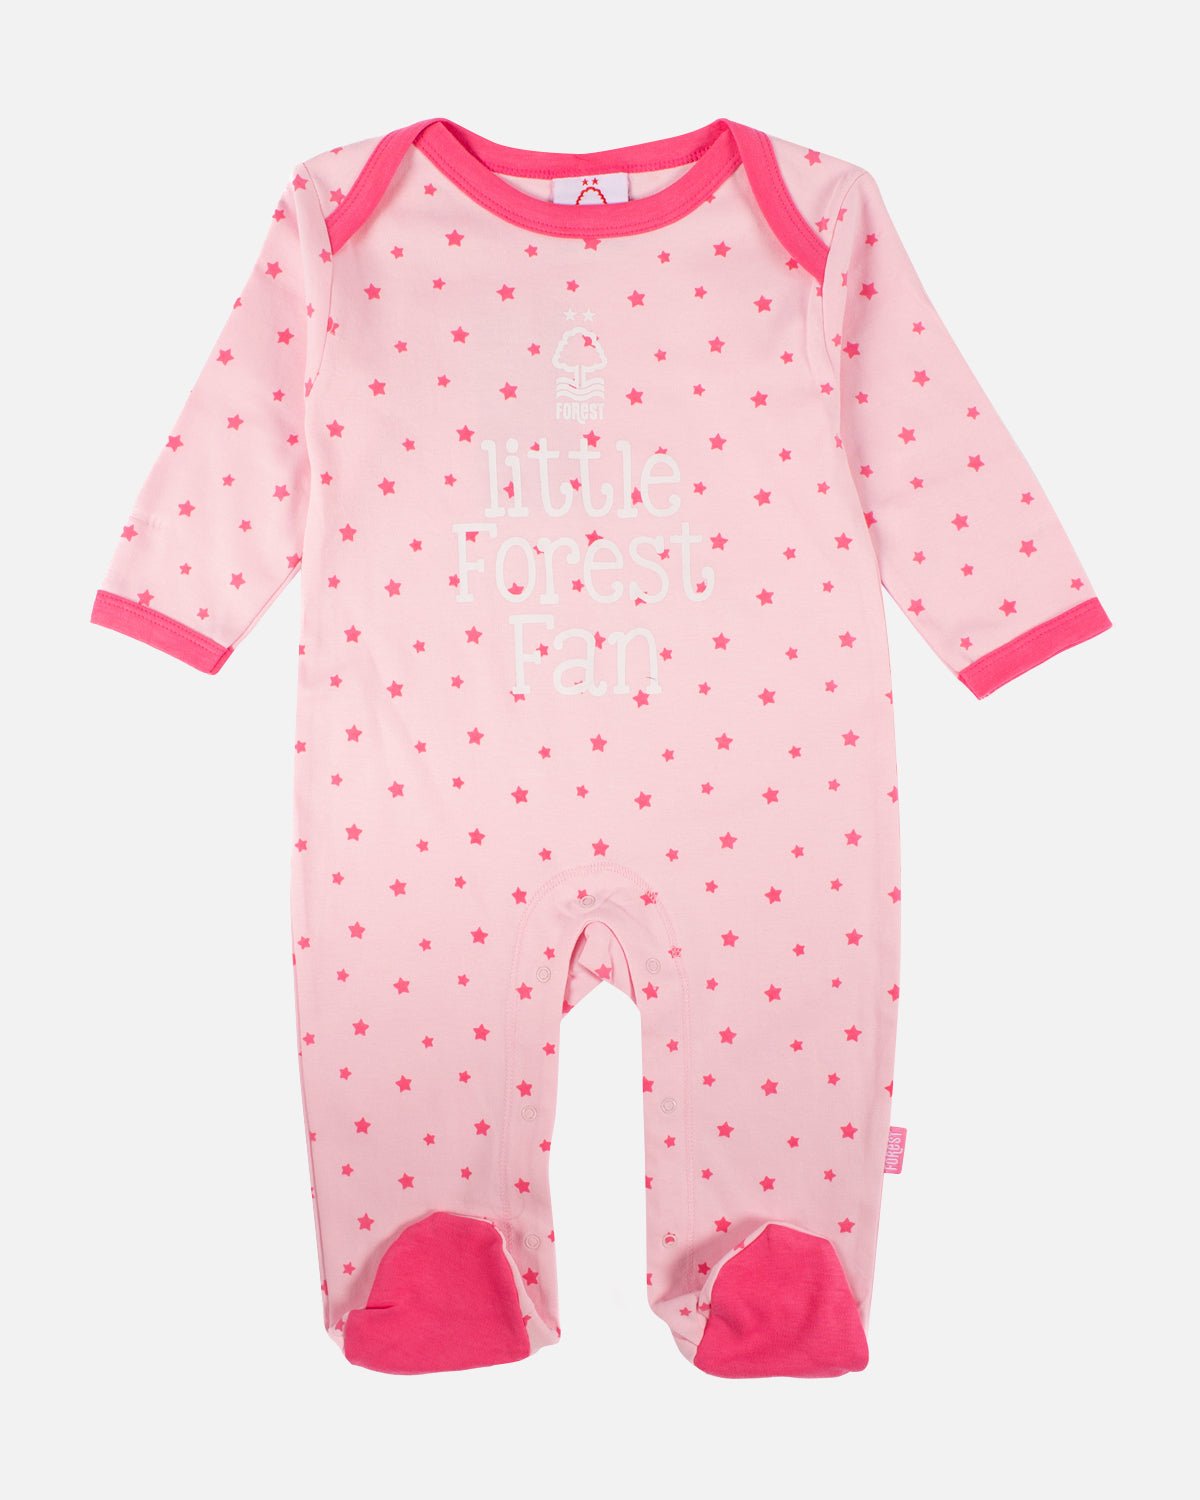 NFFC Stars Baby Sleepsuit - Nottingham Forest FC